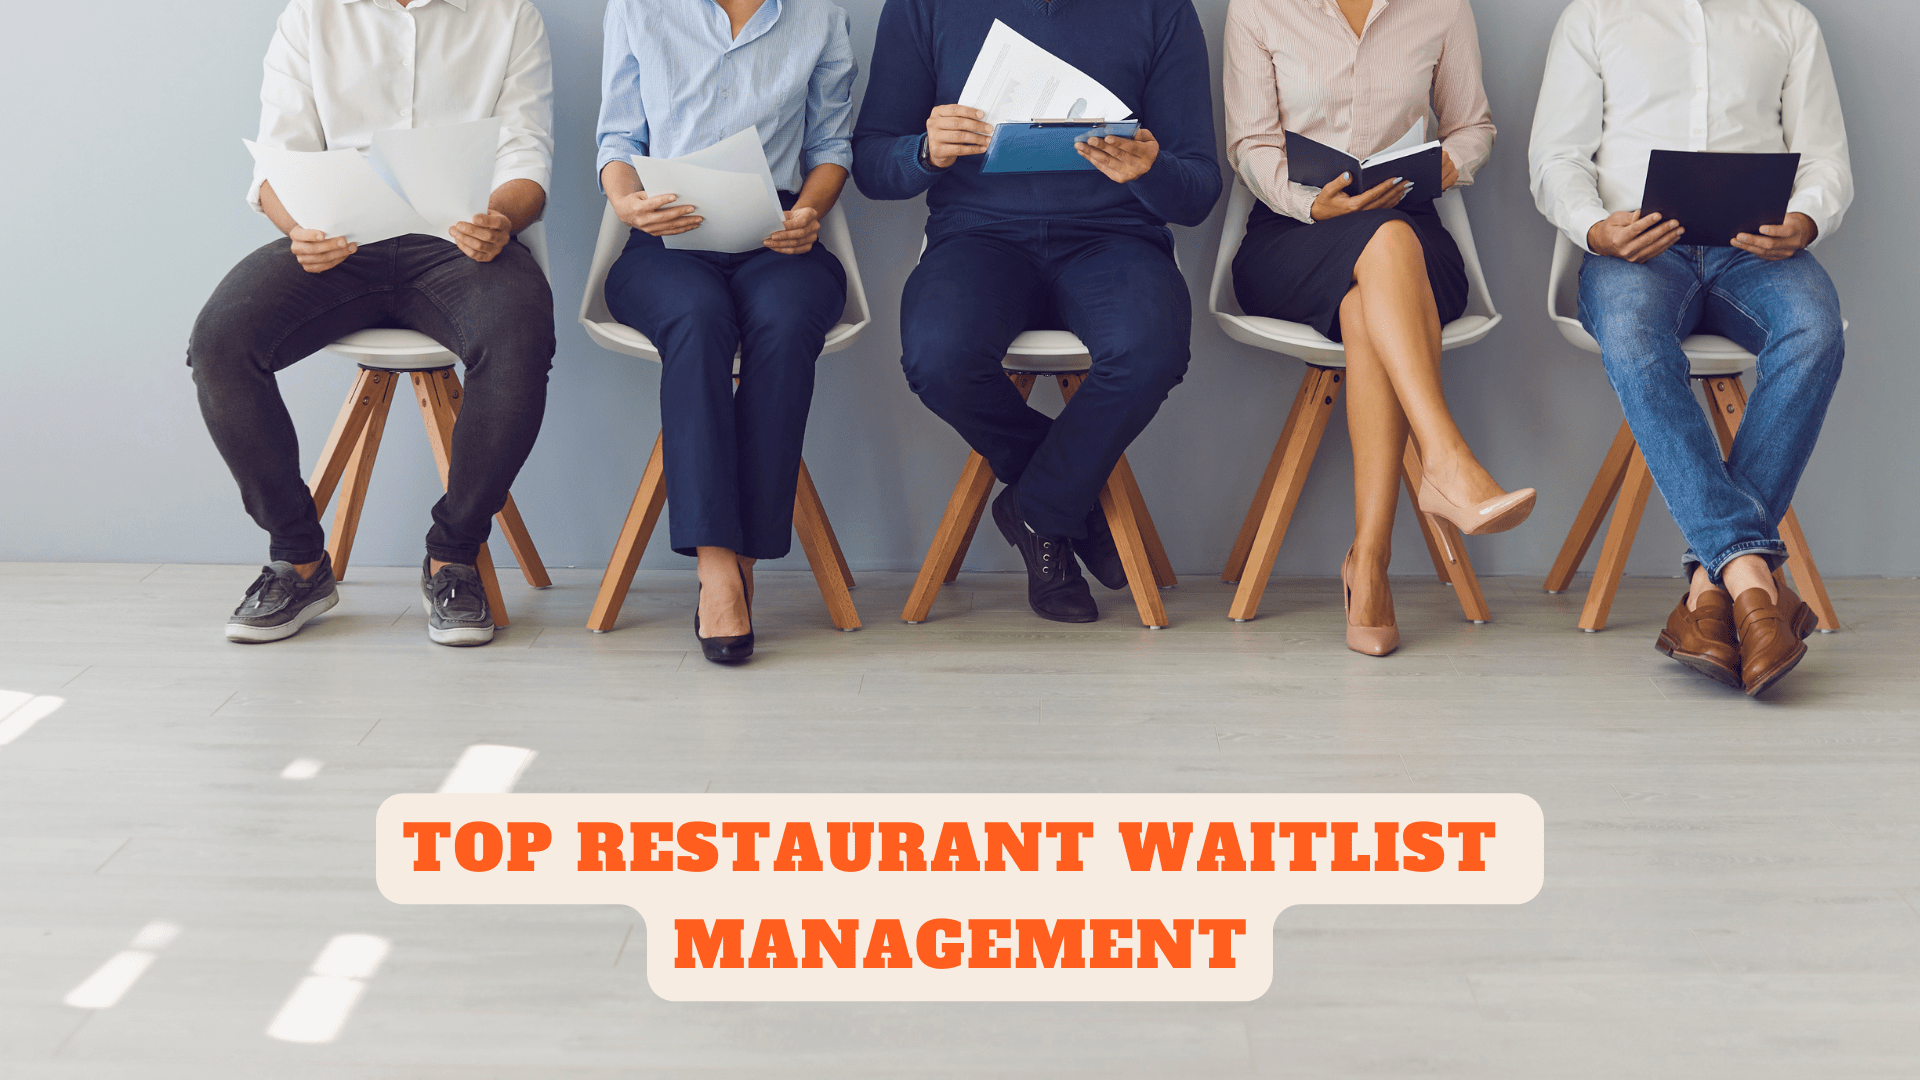 Why You Need to Add a Restaurant Waitlist Function in Your Eatery Business